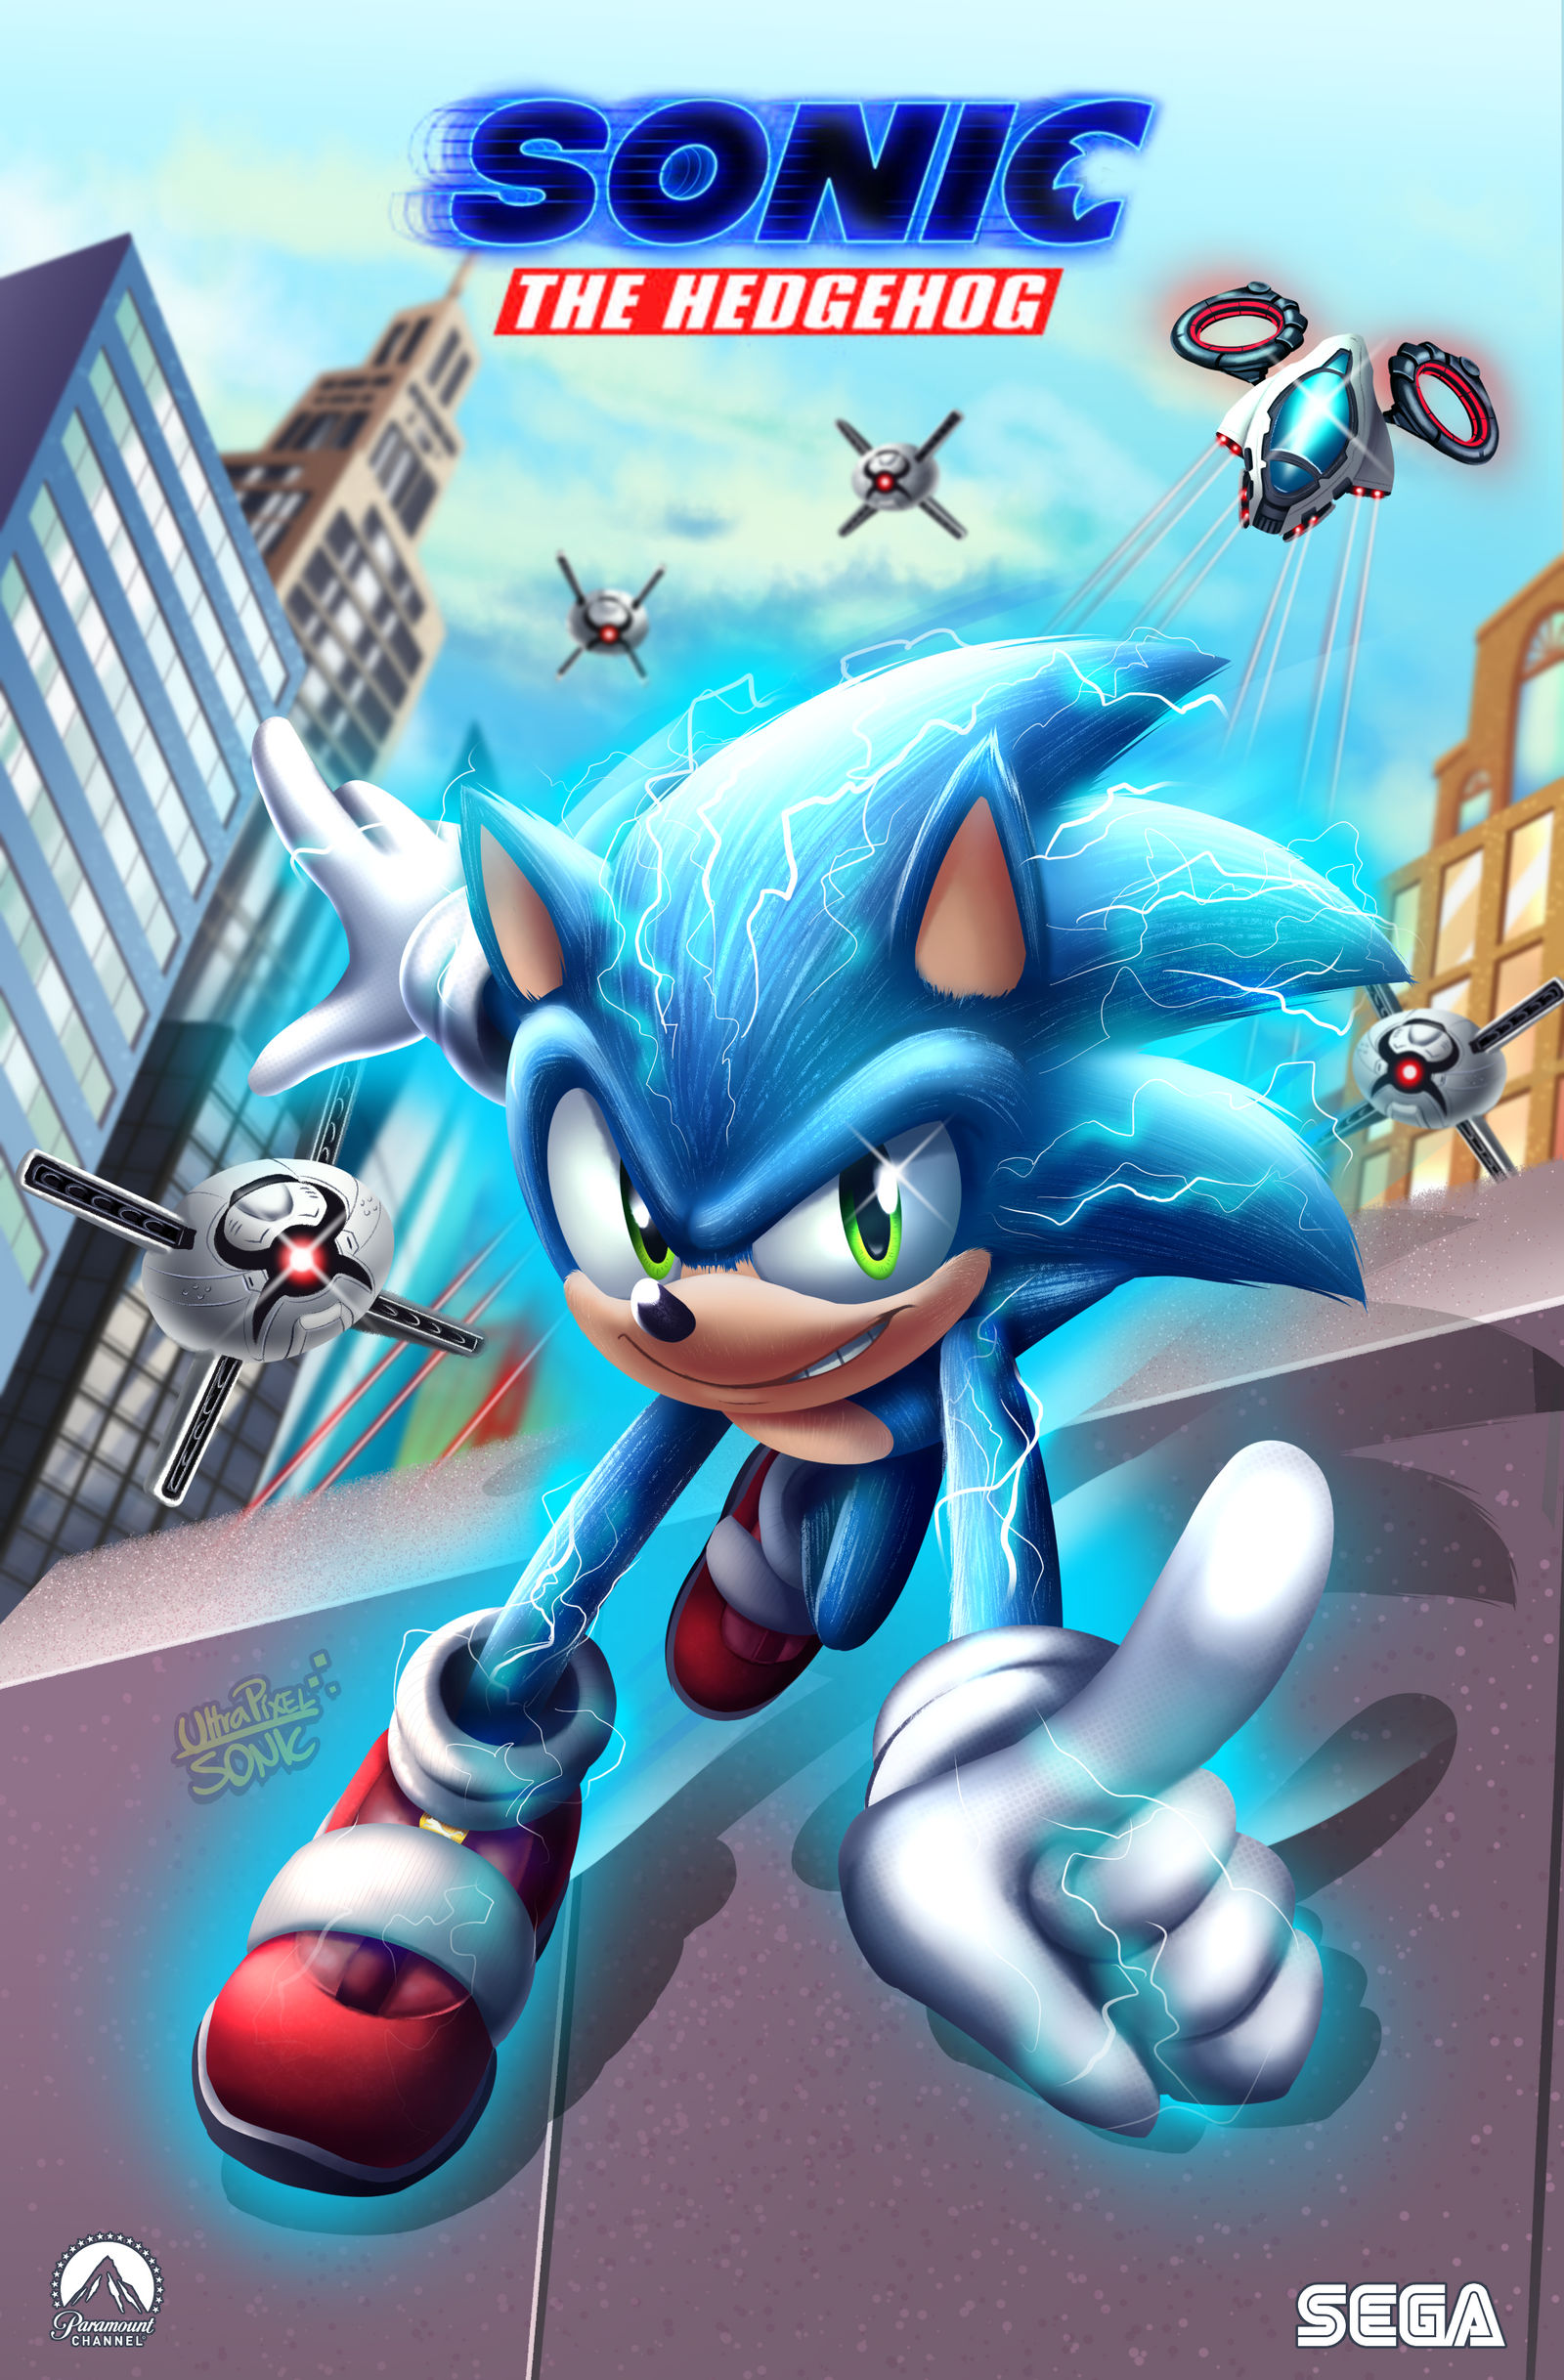 Sonic The Hedgehog 5 Poster by Dinoslayer730 on DeviantArt